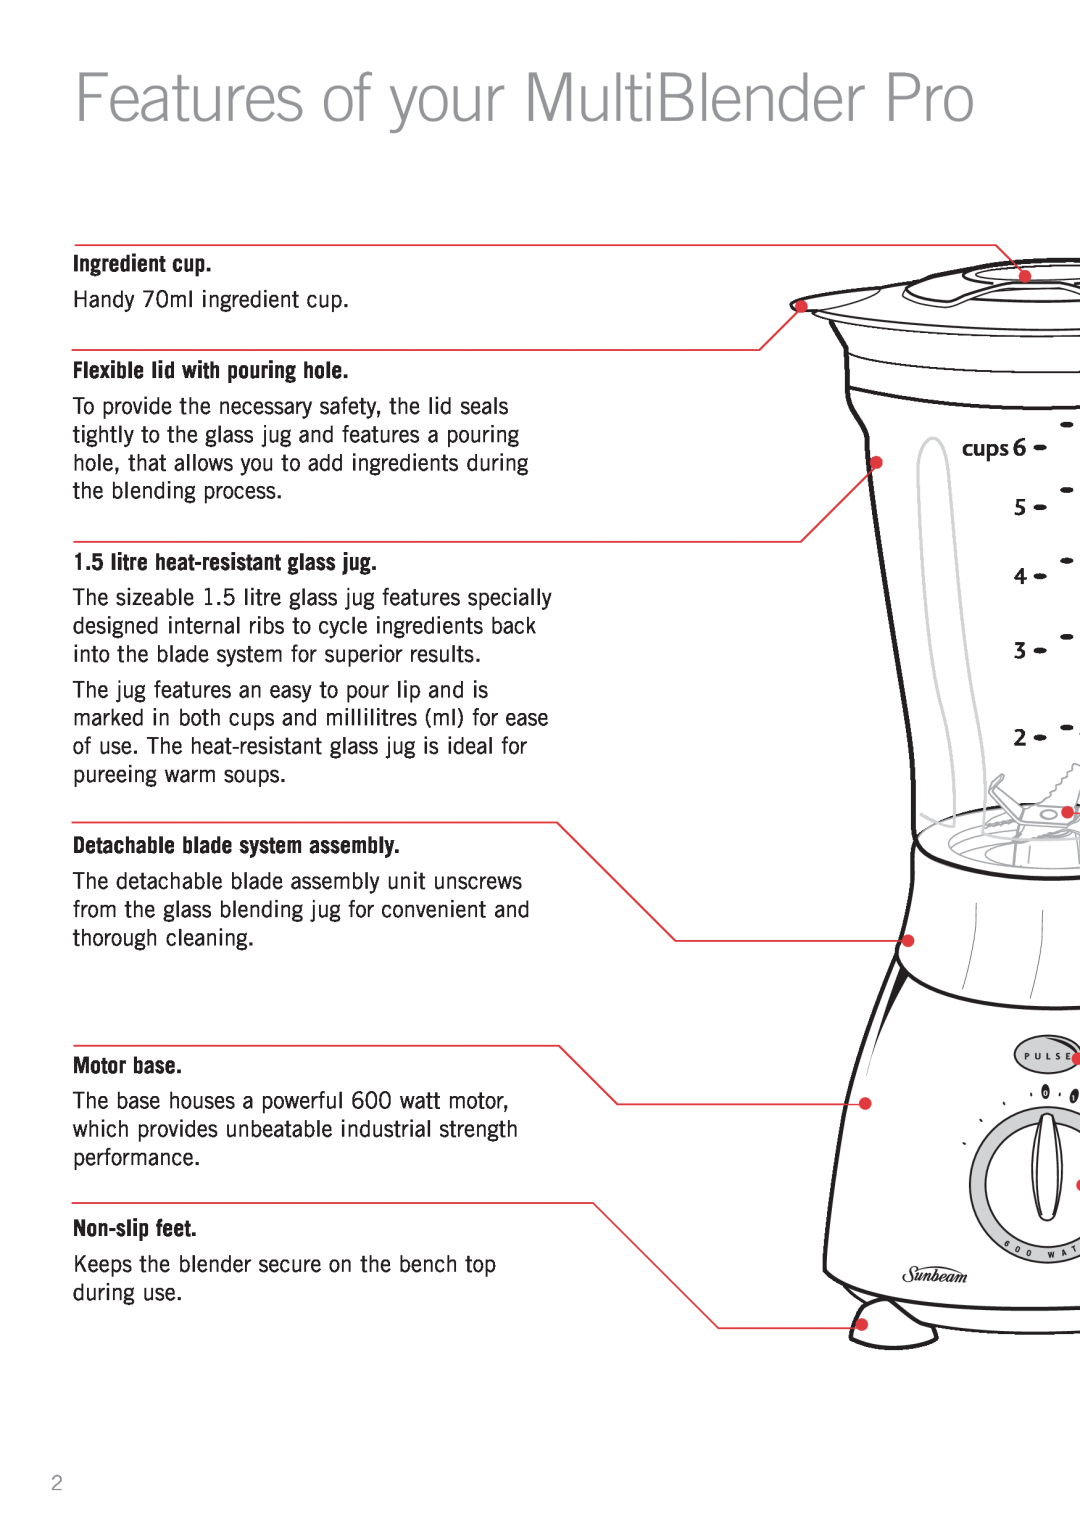 Sunbeam PB7600 Features of your MultiBlender Pro, Ingredient cup, Flexible lid with pouring hole, Motor base, Non-slipfeet 